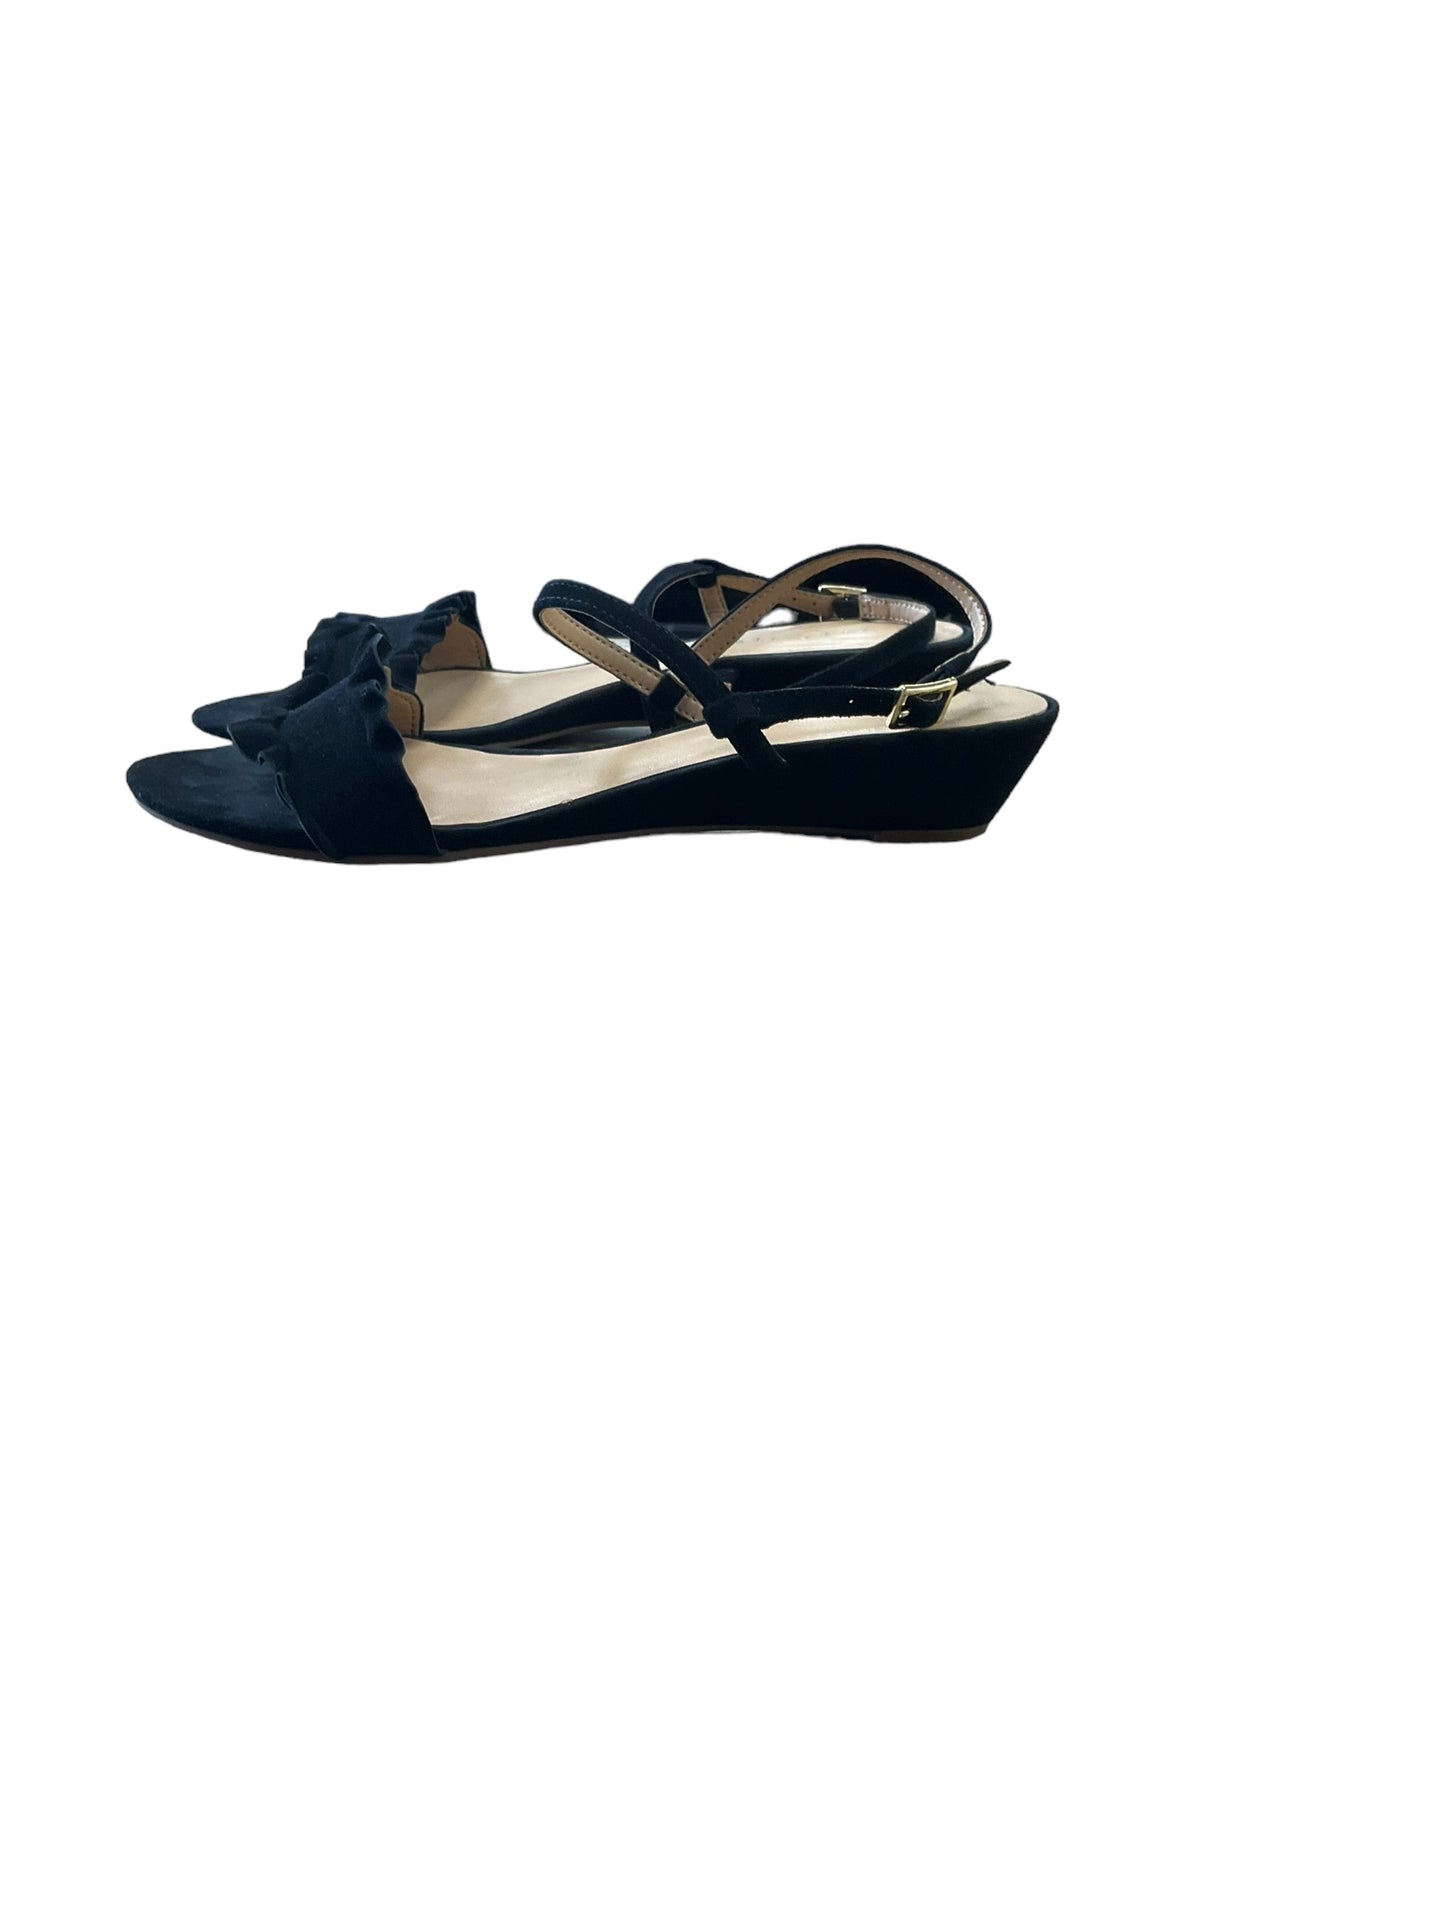 Sandals Heels Wedge By Talbots  Size: 8.5